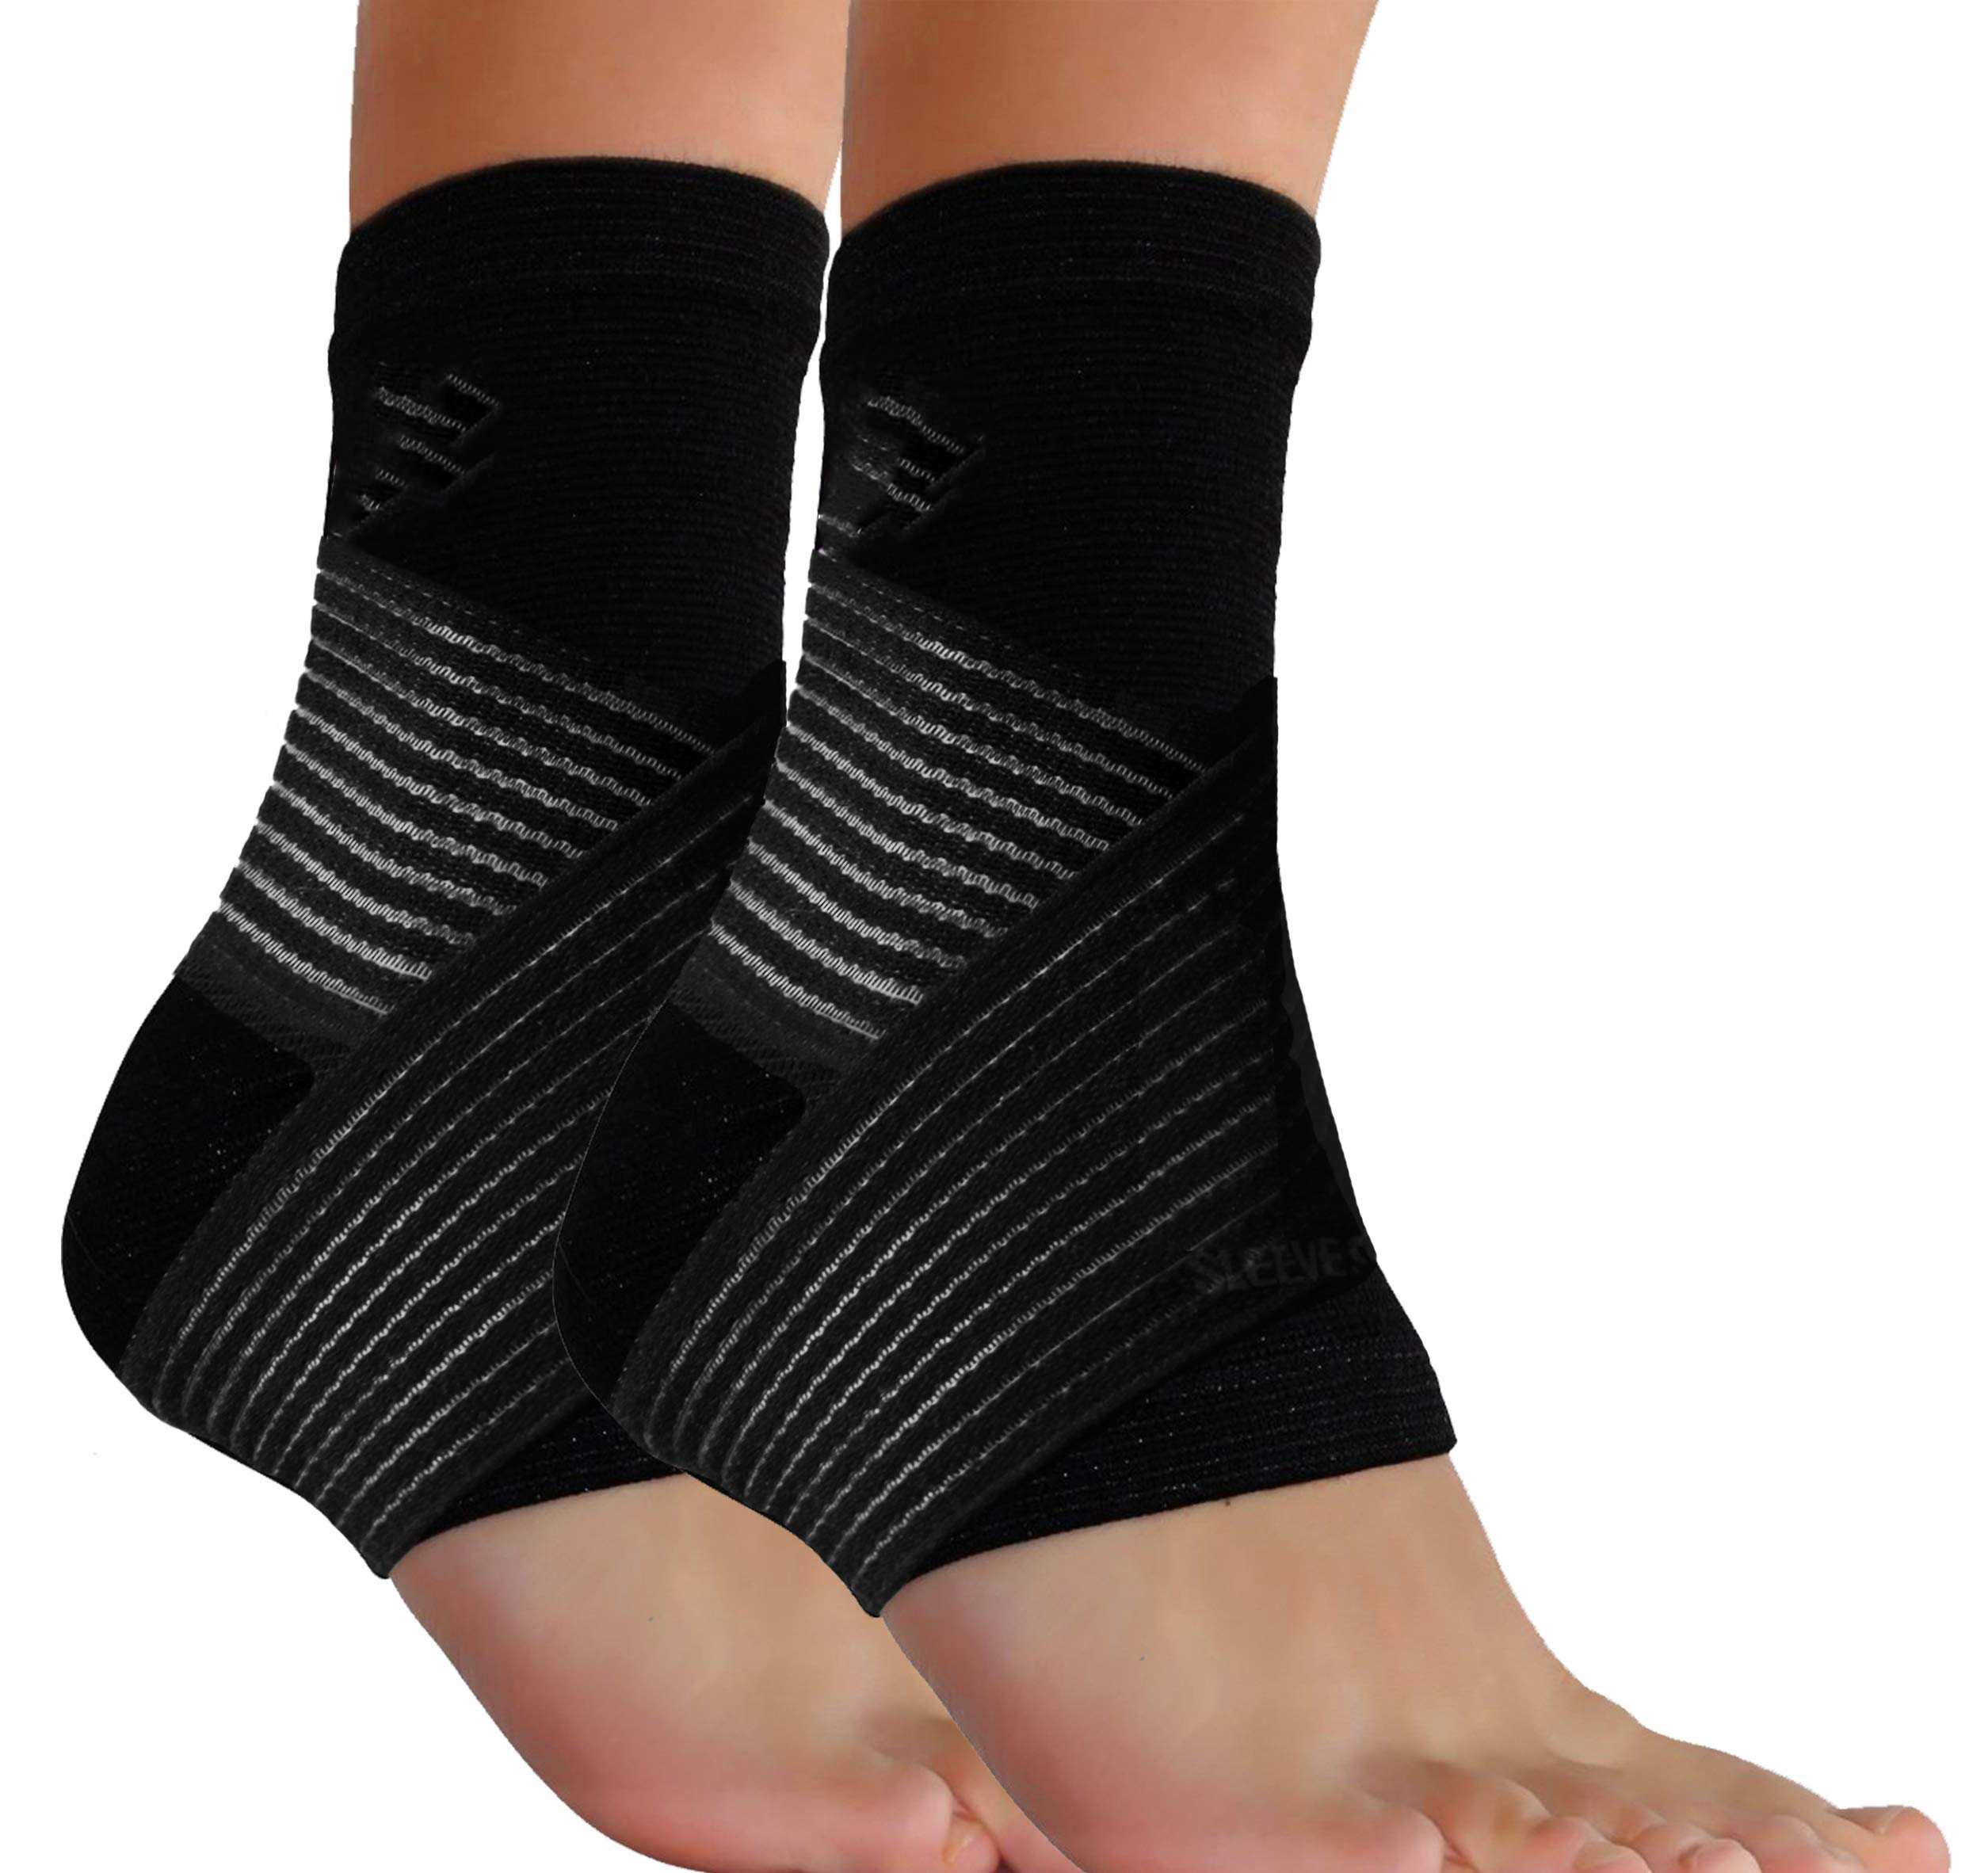 Ankle Support Brace Compression Sleeve Pain Relief Foot Plantar Fasciitis  Wrap